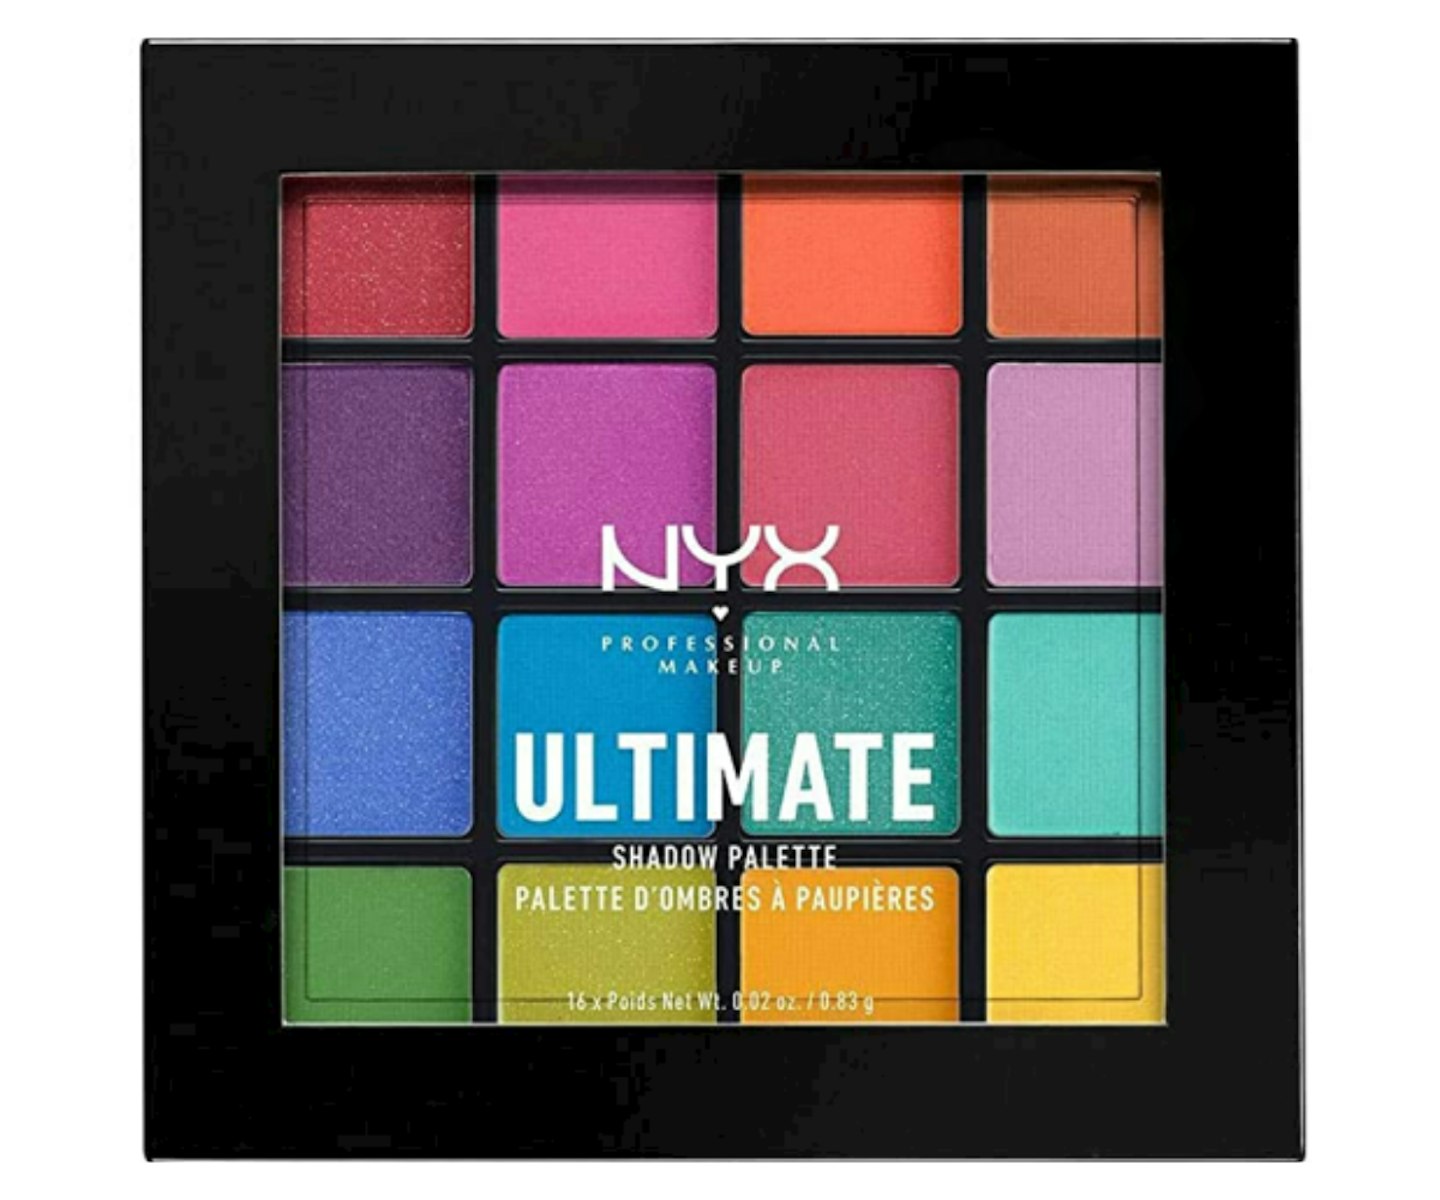 A picture of the NYX eyeshadow palette featured in article